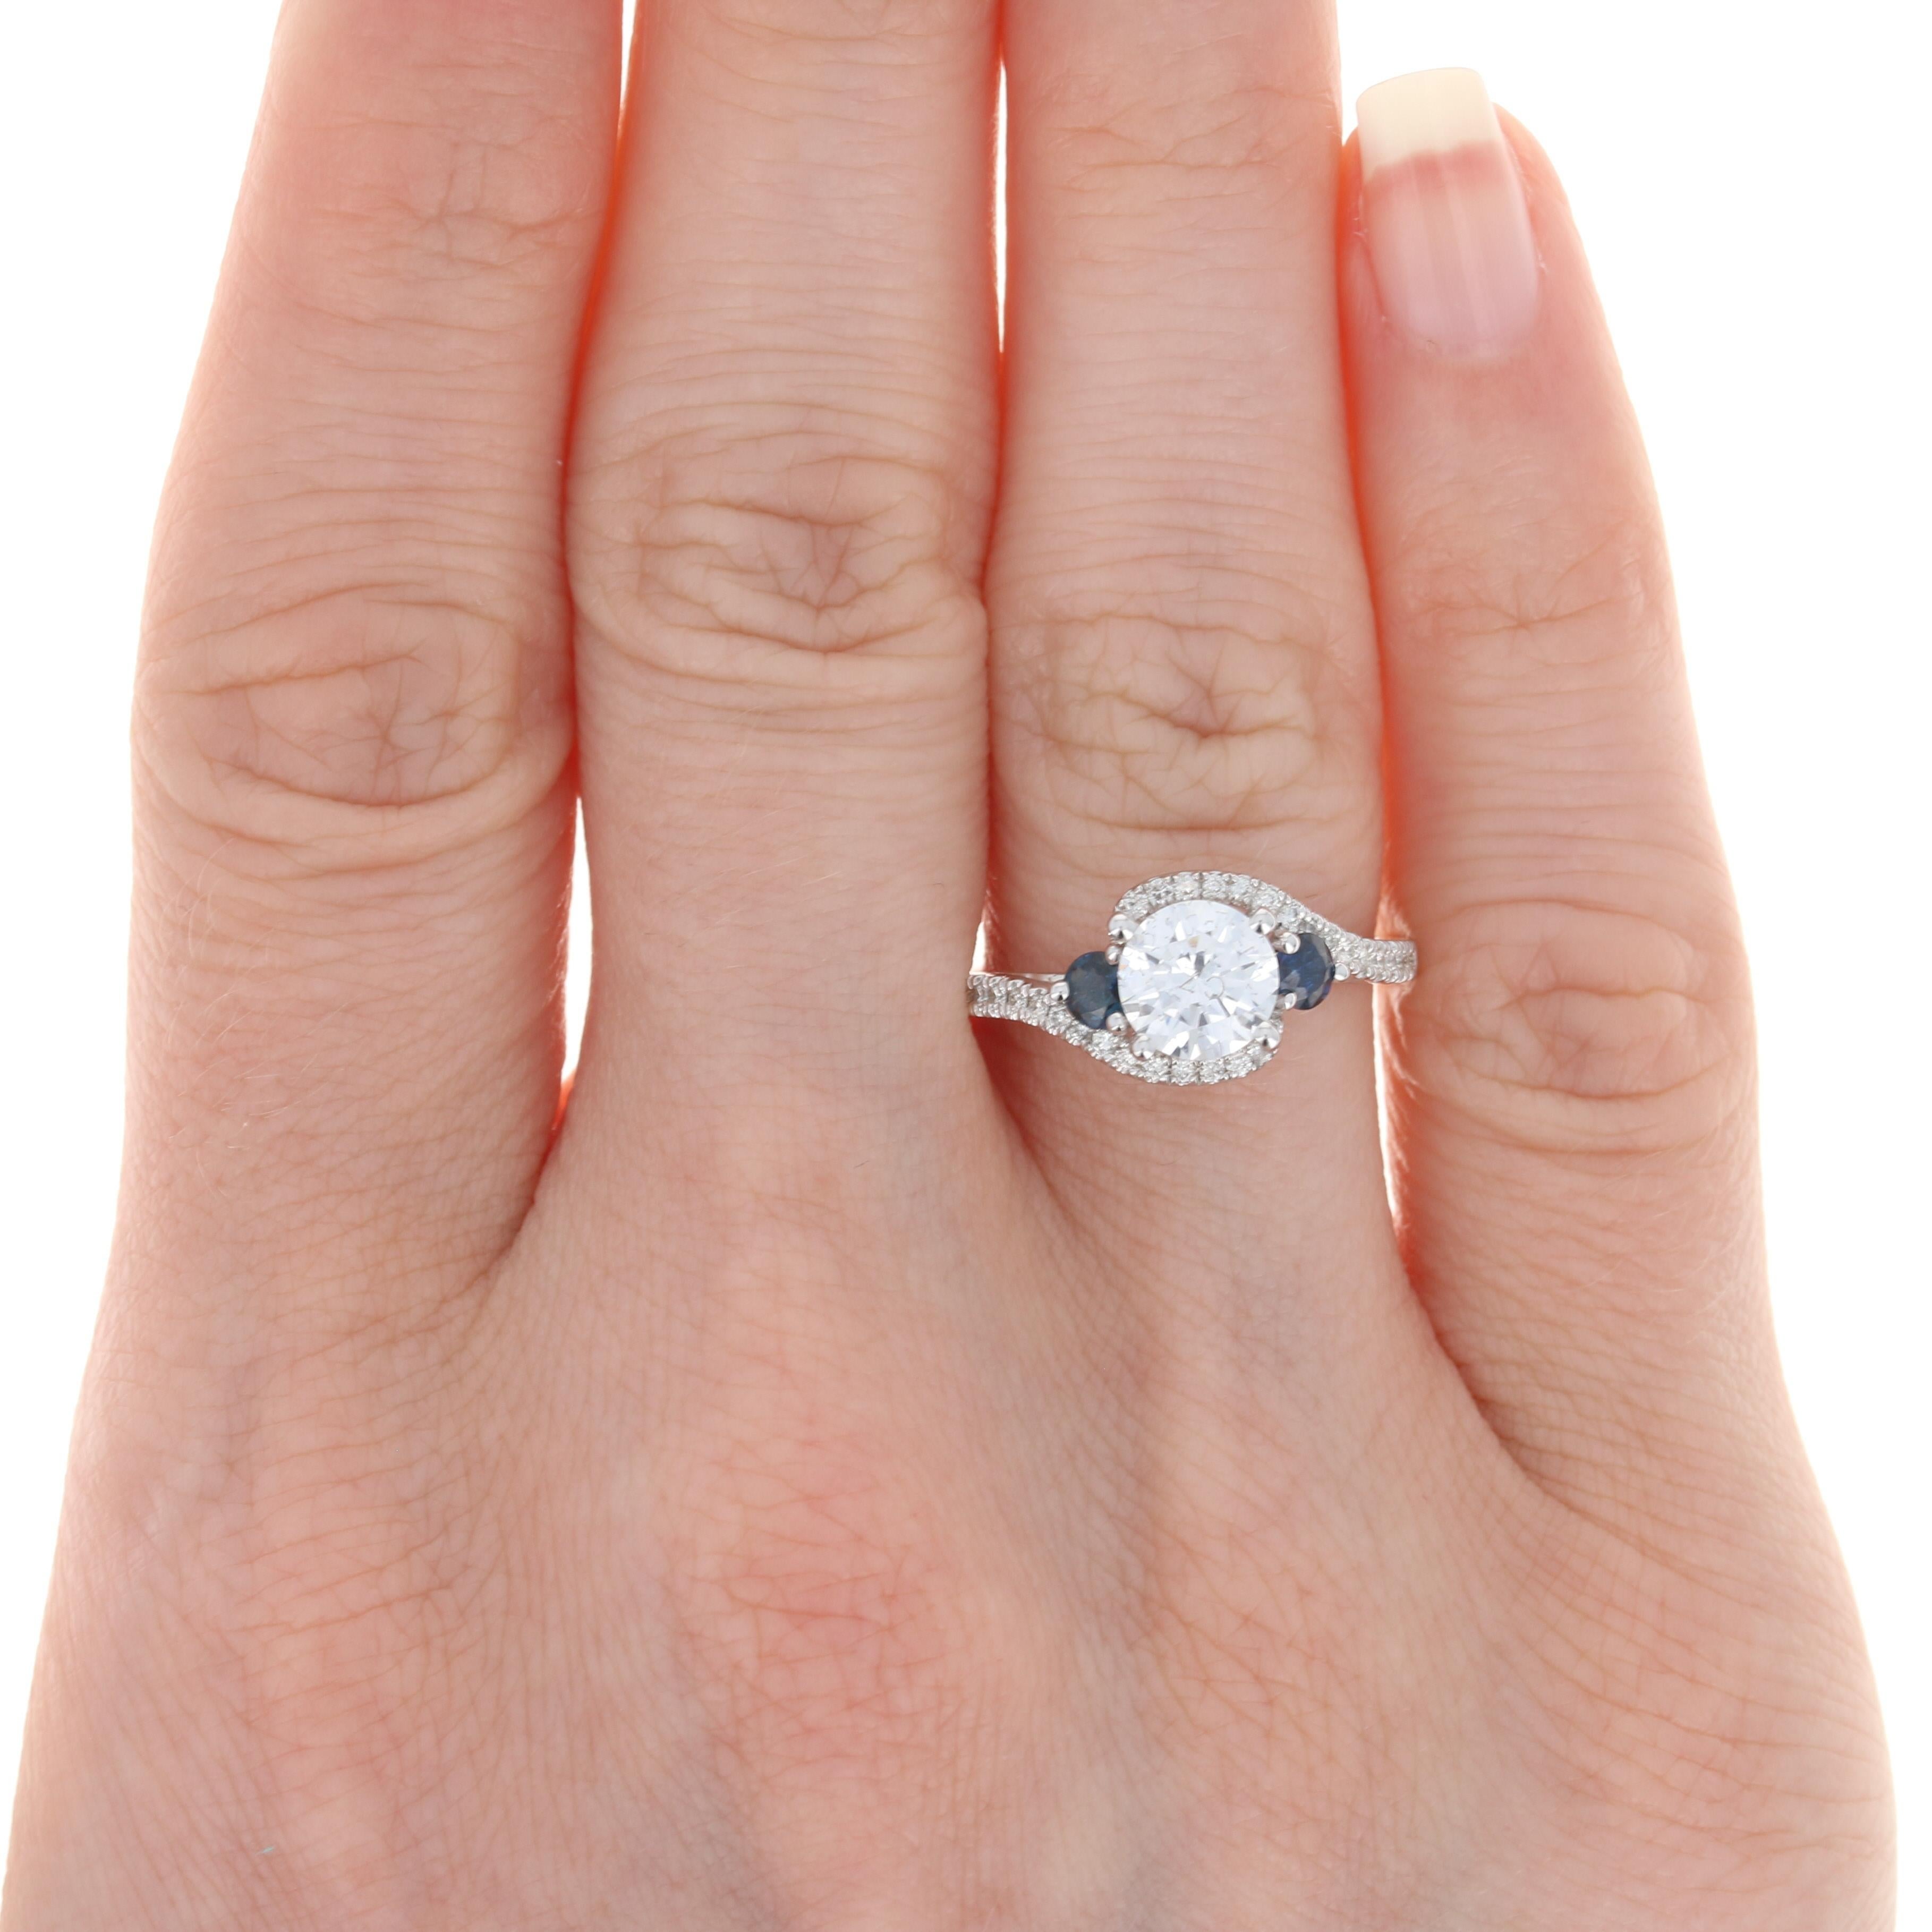 Showcase your perfect diamond or heirloom gemstone in this NEW three-piece wedding set by Scott Kay. Fashioned in popular 14k white gold, the set features an elegant, bypass-style engagement ring with a raised semi-mount for a 6.5mm diamond or